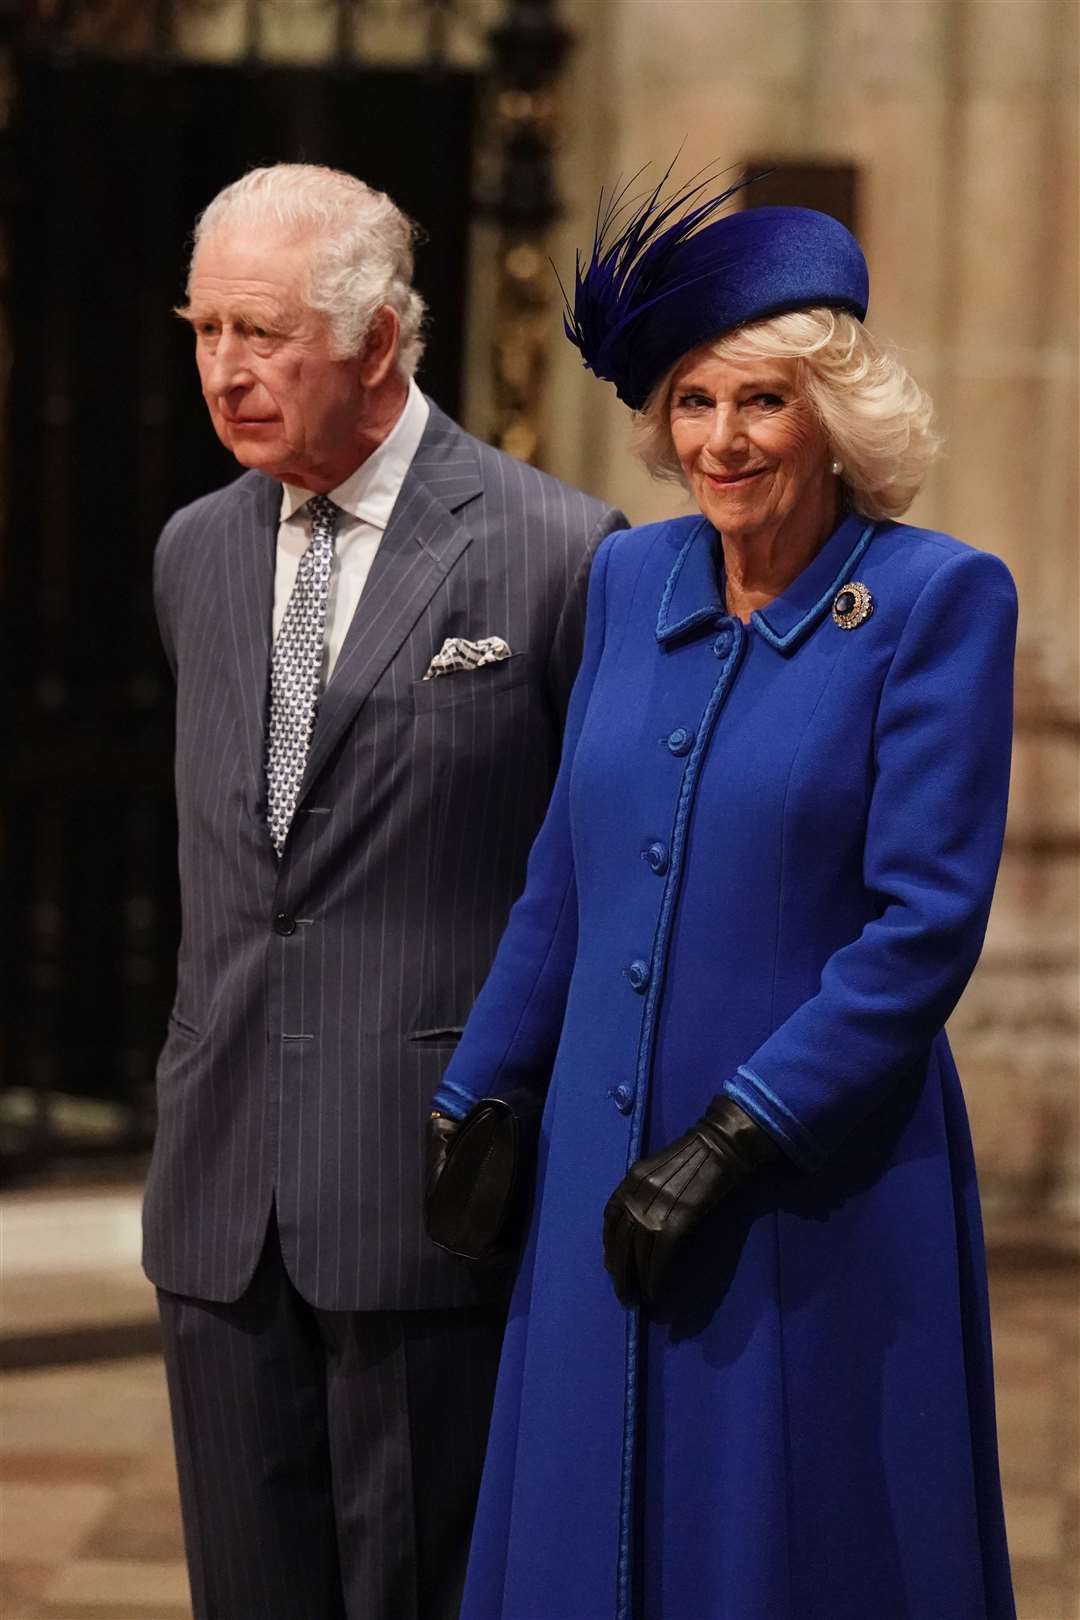 The King and the Queen Consort arrive for the service (Jordan Pettitt/PA)